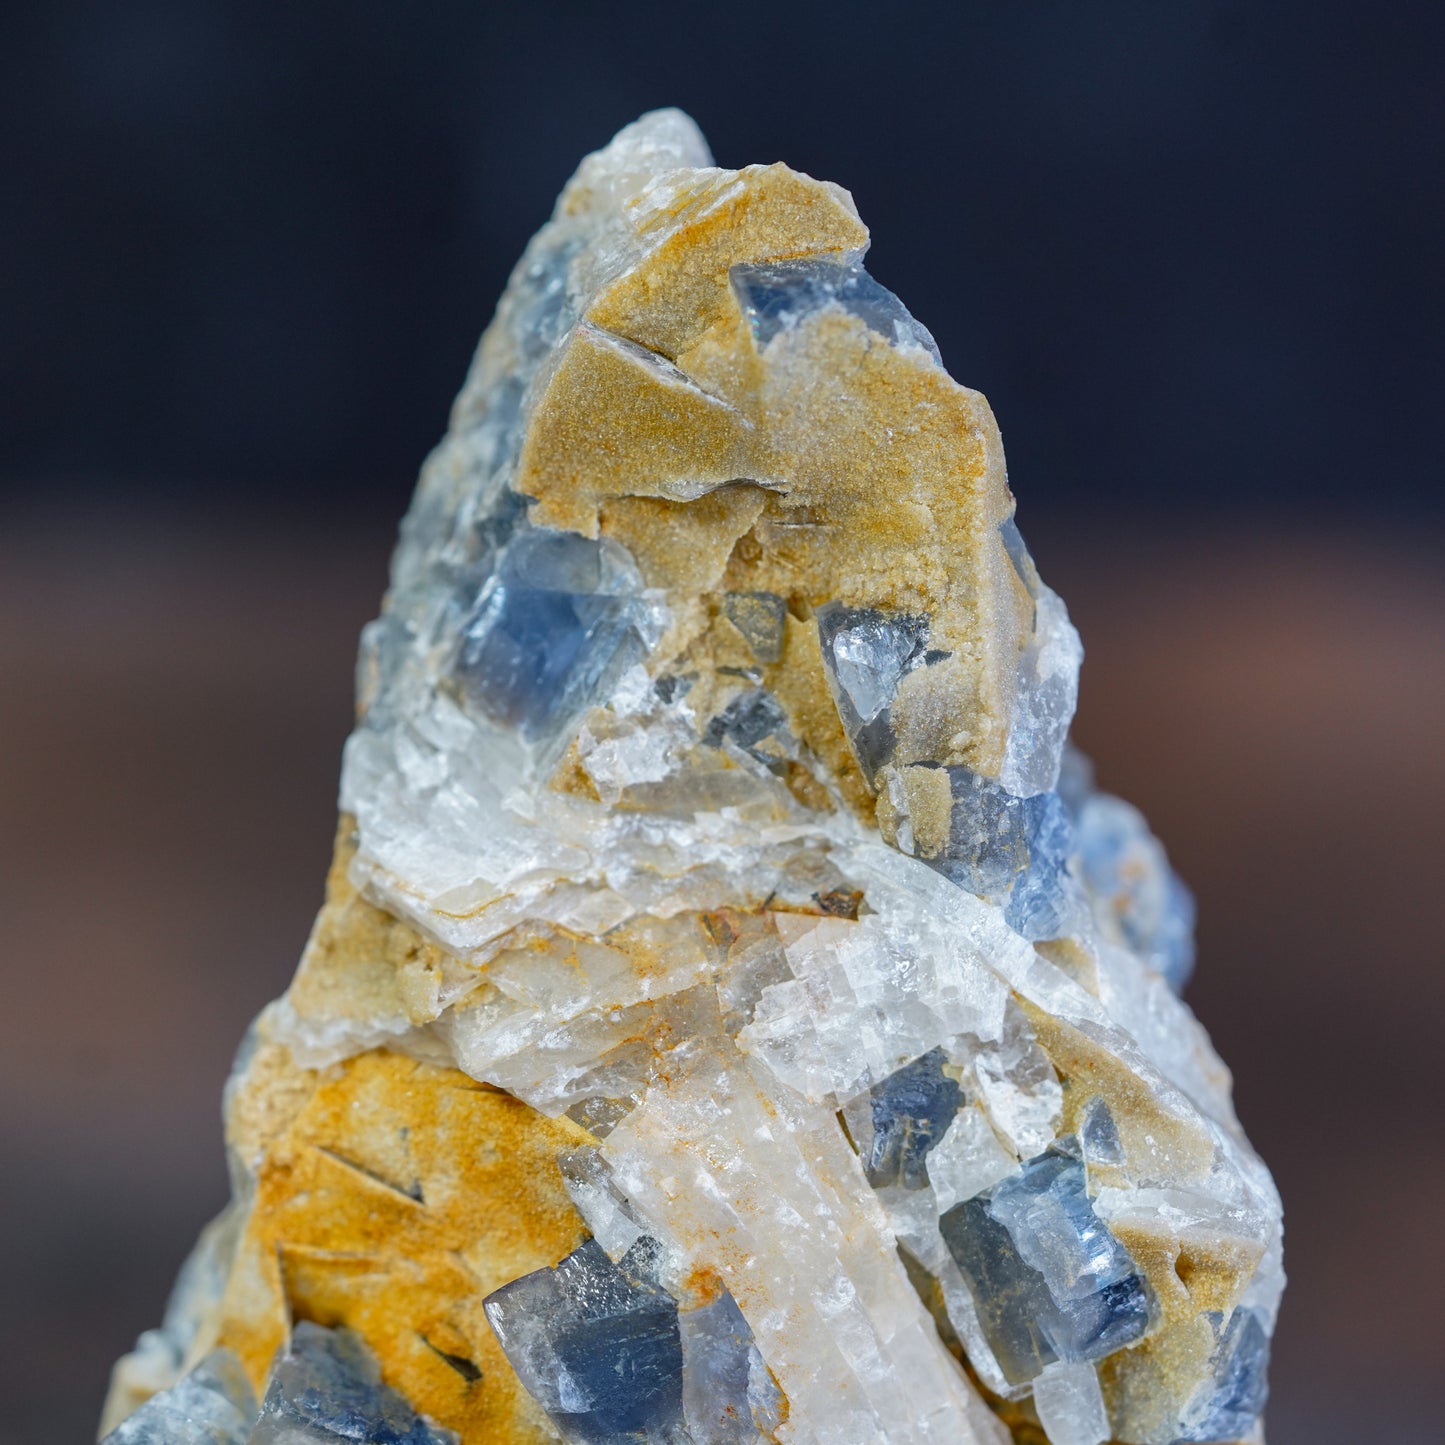 Blue Fluorite Crystal Cluster with Calcite